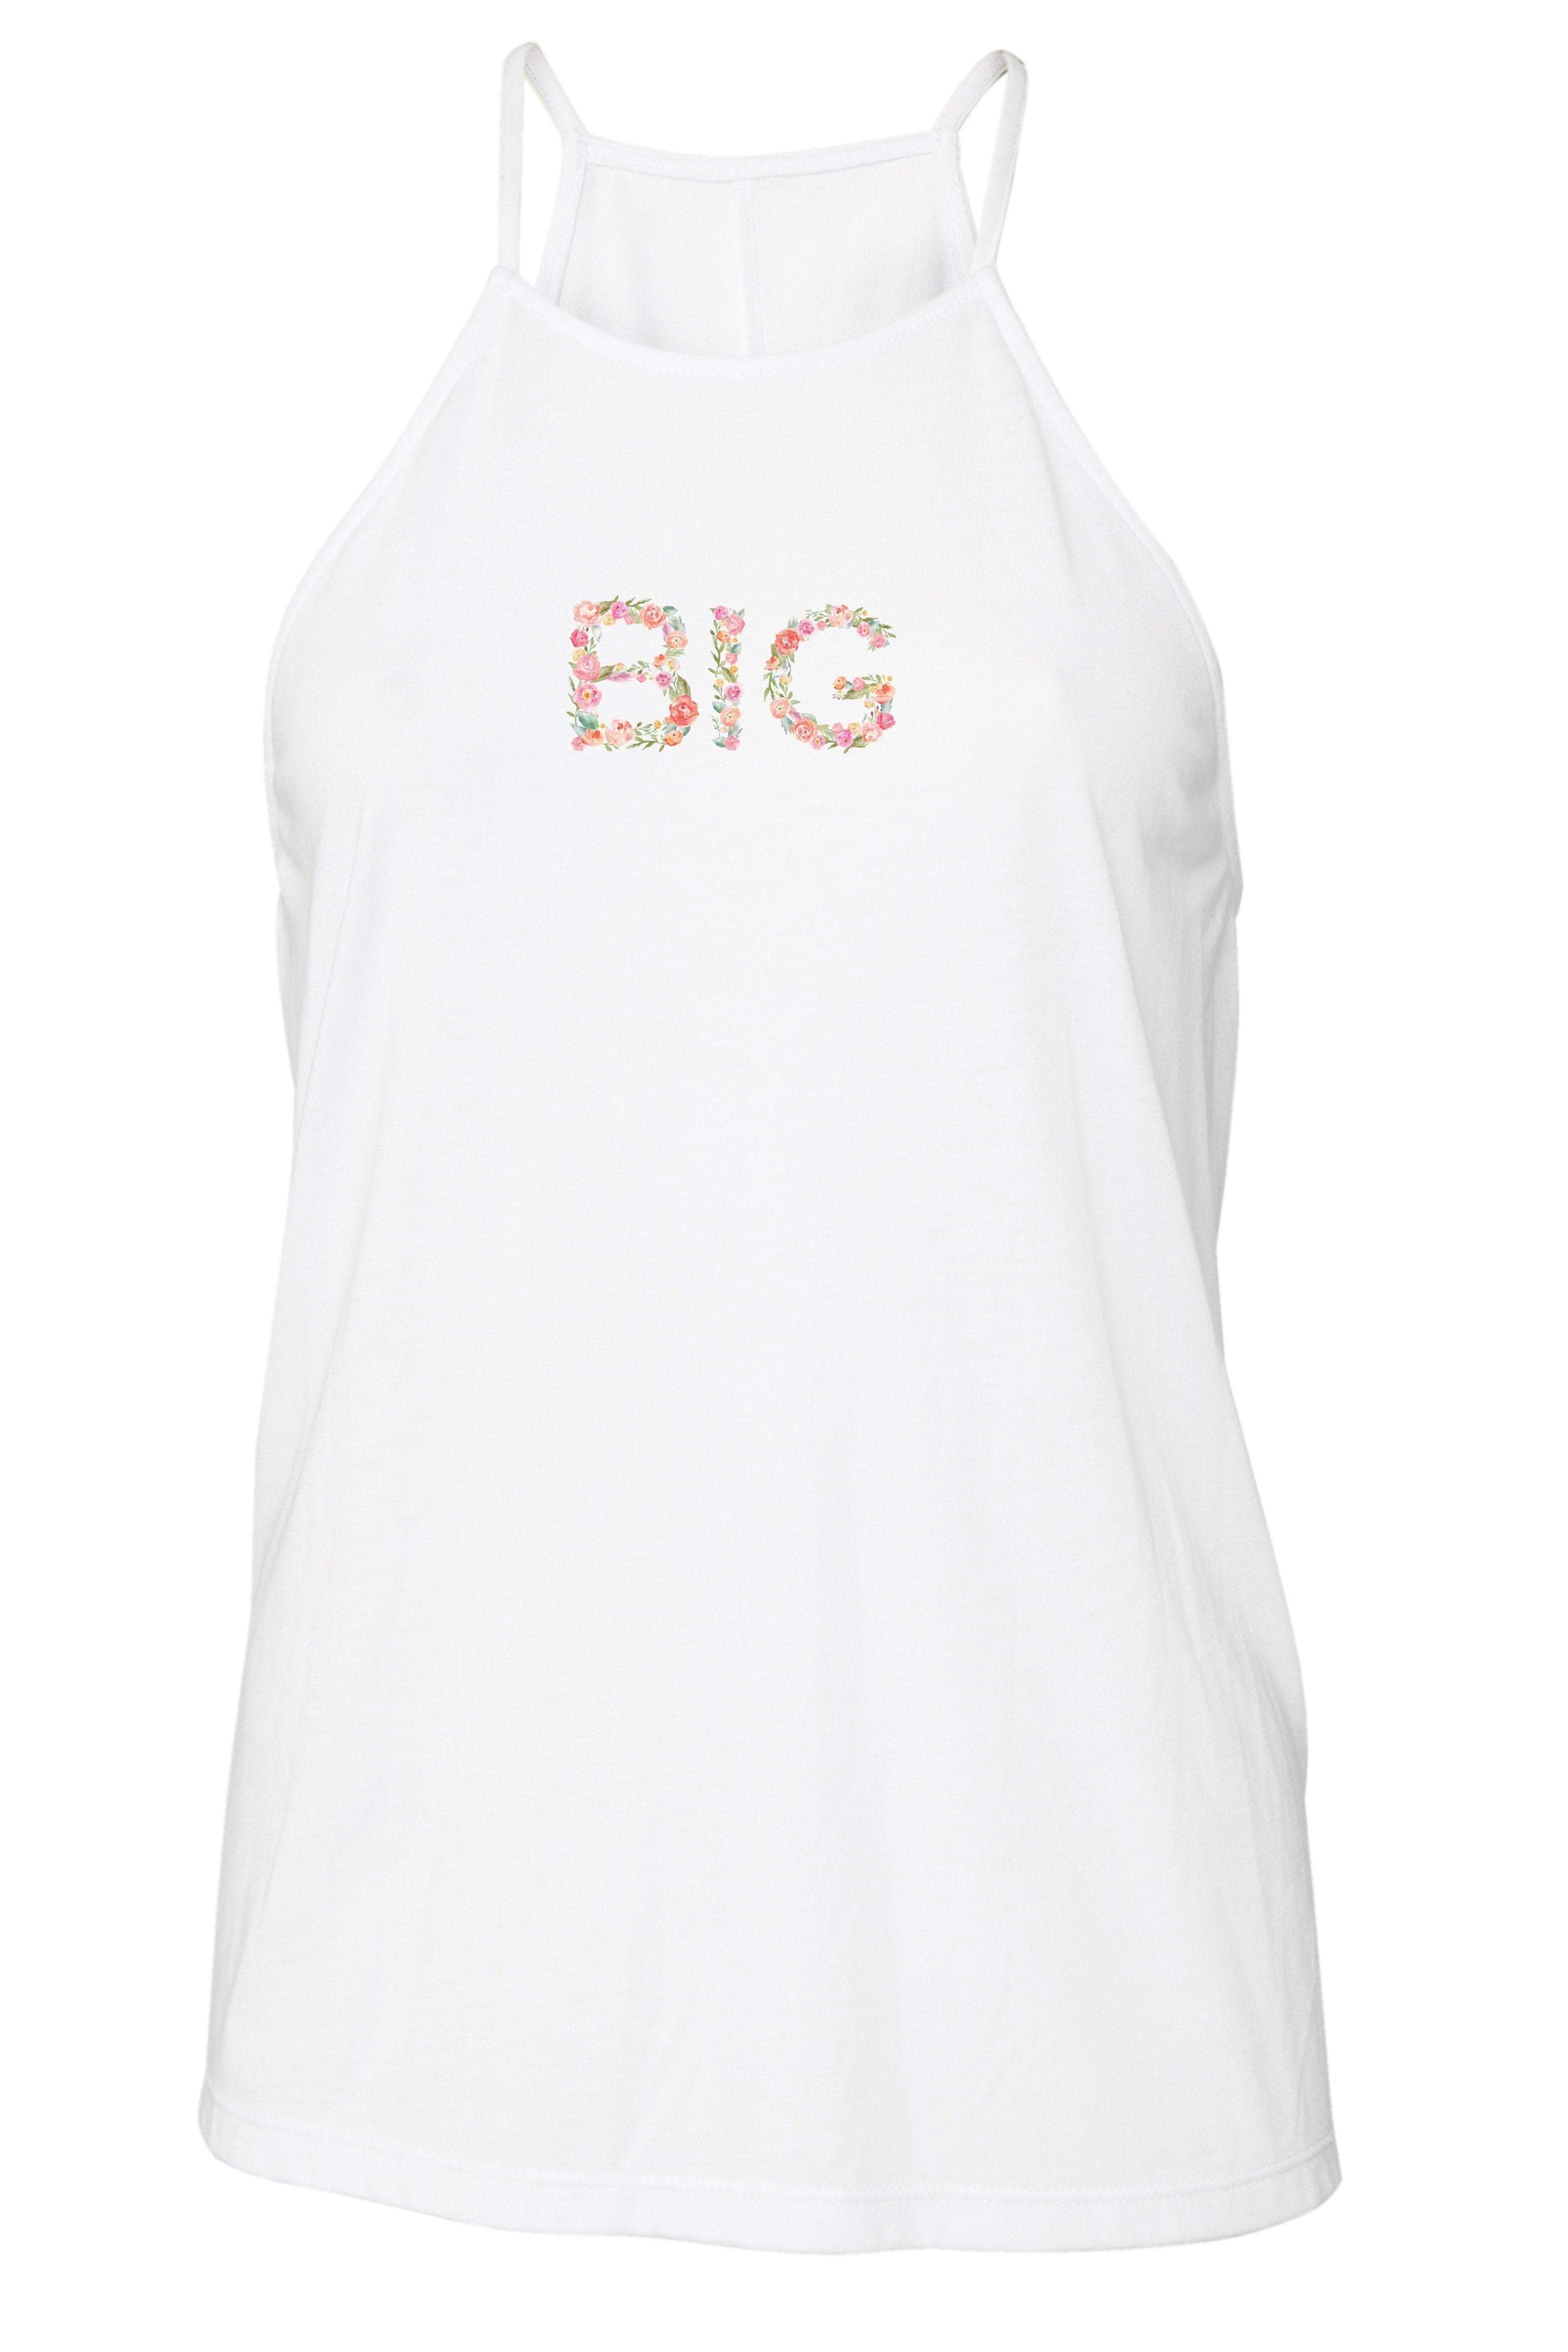 Big Little Floral Letters Tank - Bella Flowy High Neck, Ladies, Sunny and Southern, - Sunny and Southern,